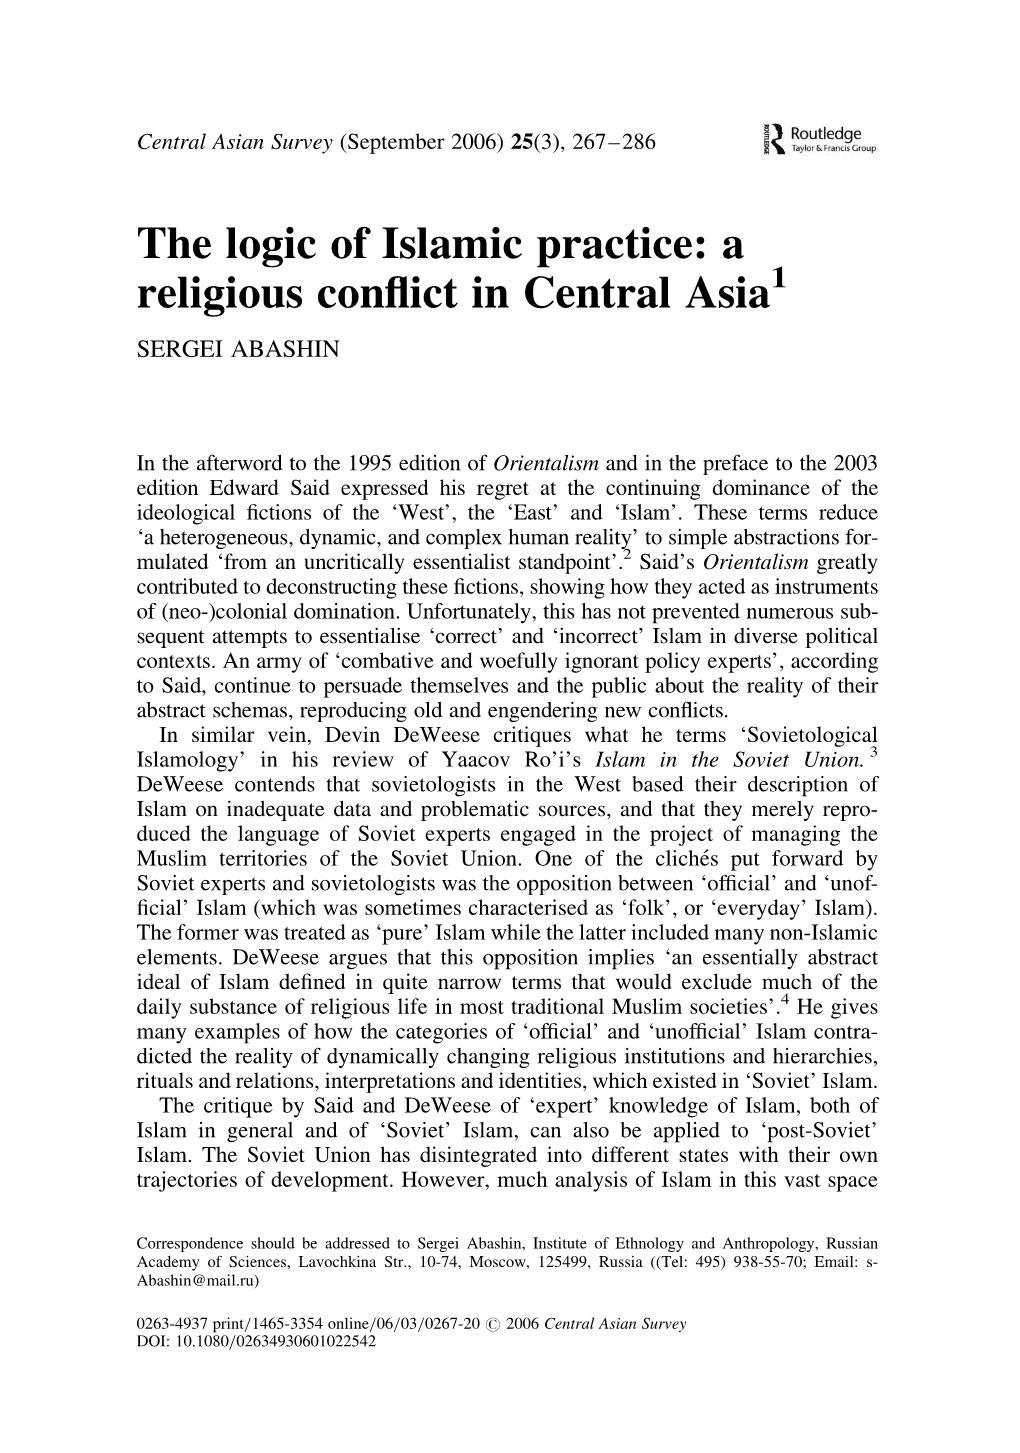 The Logic of Islamic Practice: a Religious Conflict in Central Asia